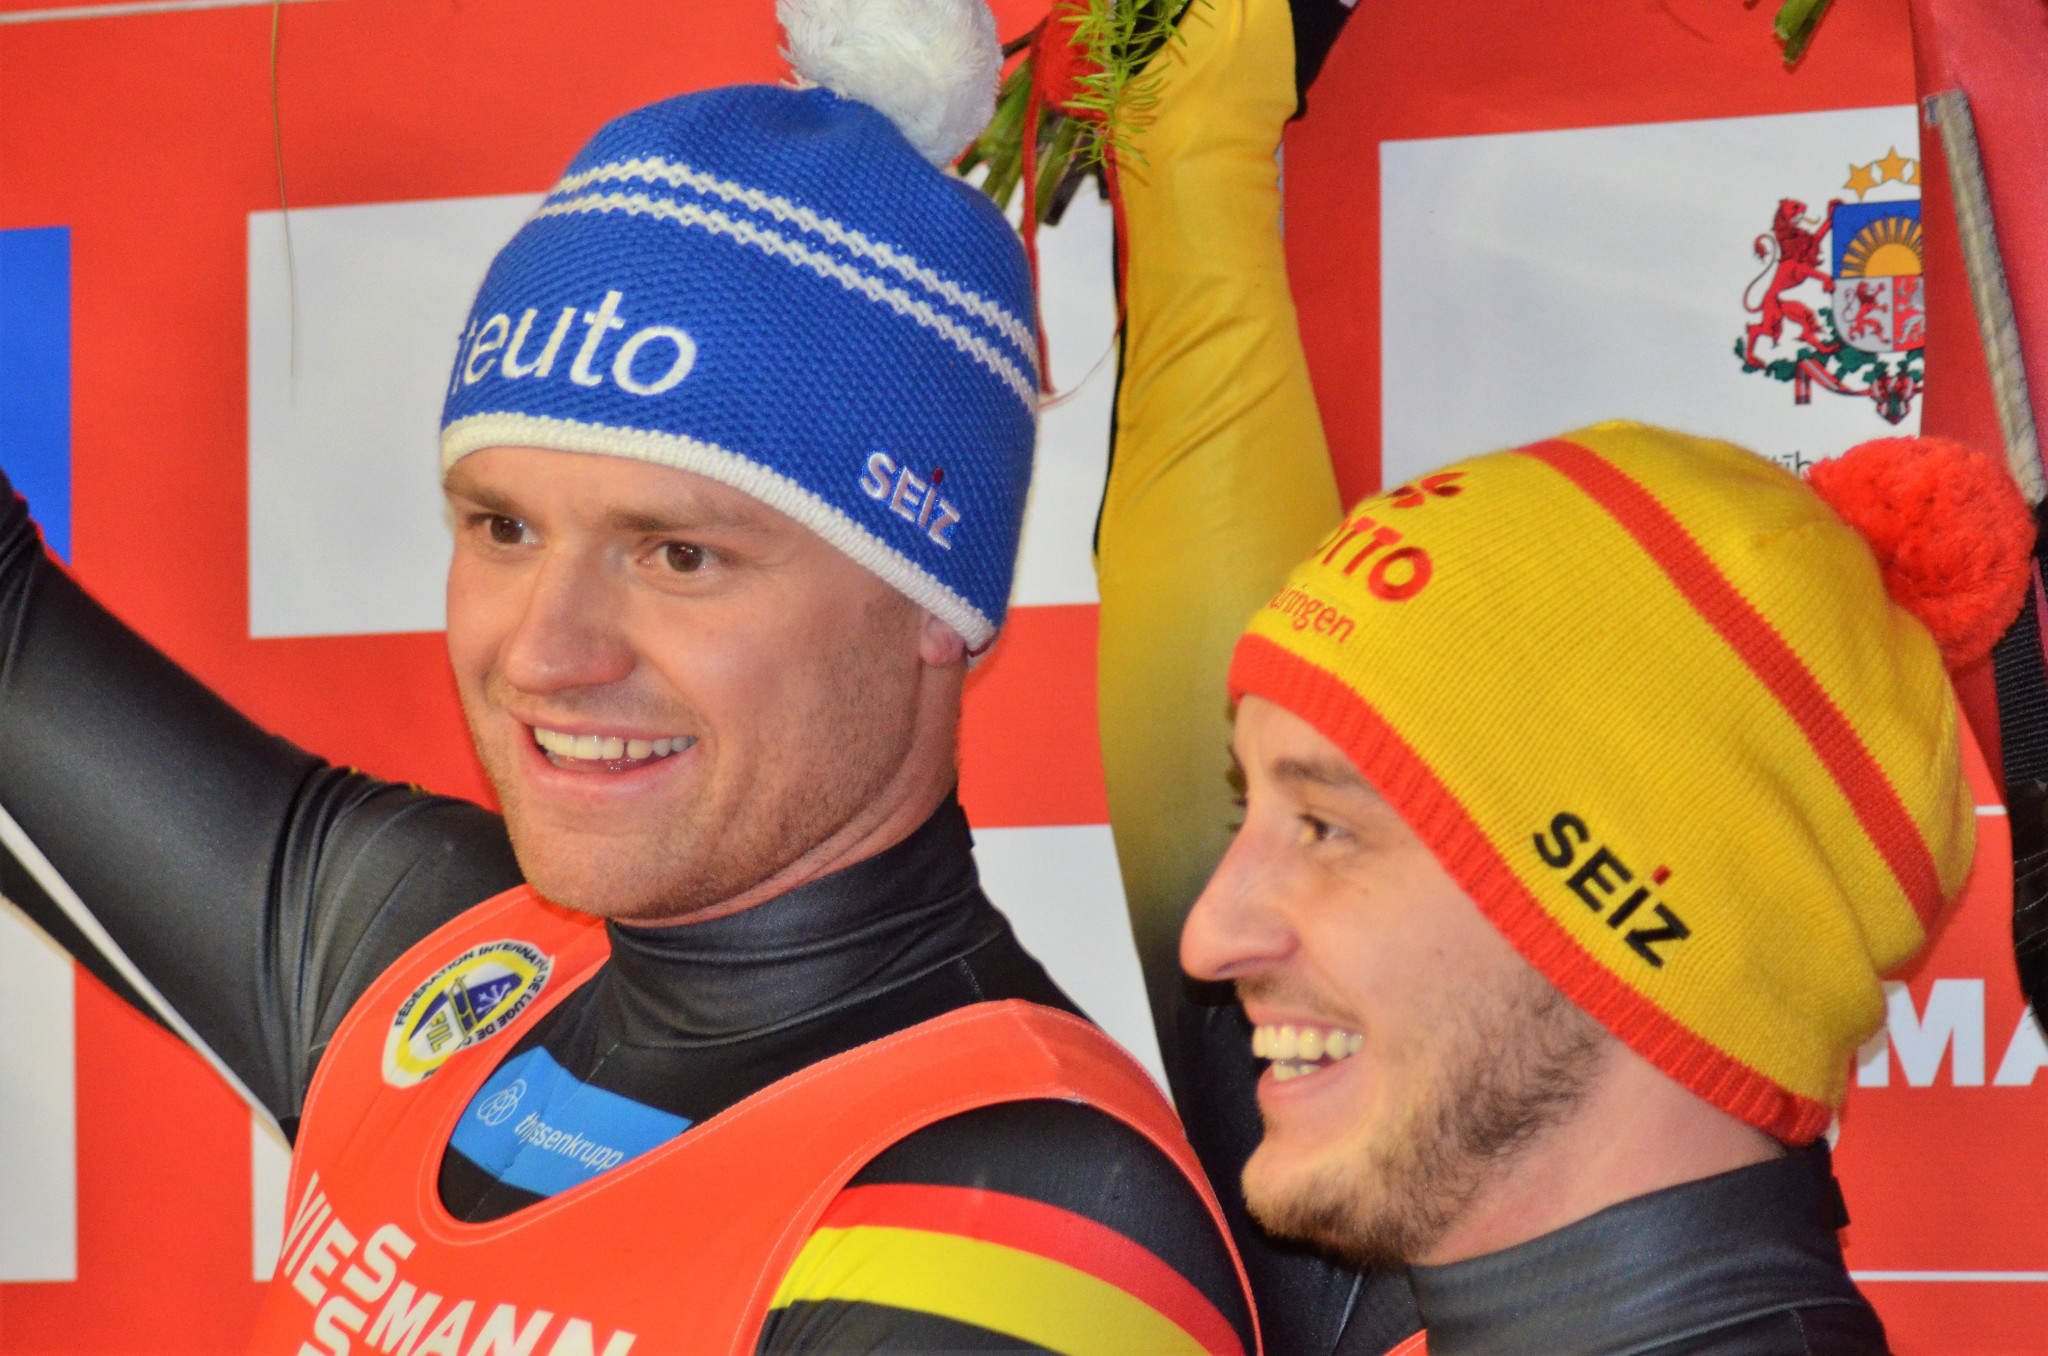 Germany's Toni Eggert and Sascha Benecken continued their dominance in the doubles competition at the FIL World Cup in Sigulda with their fourth consecutive victory this season ©FIL